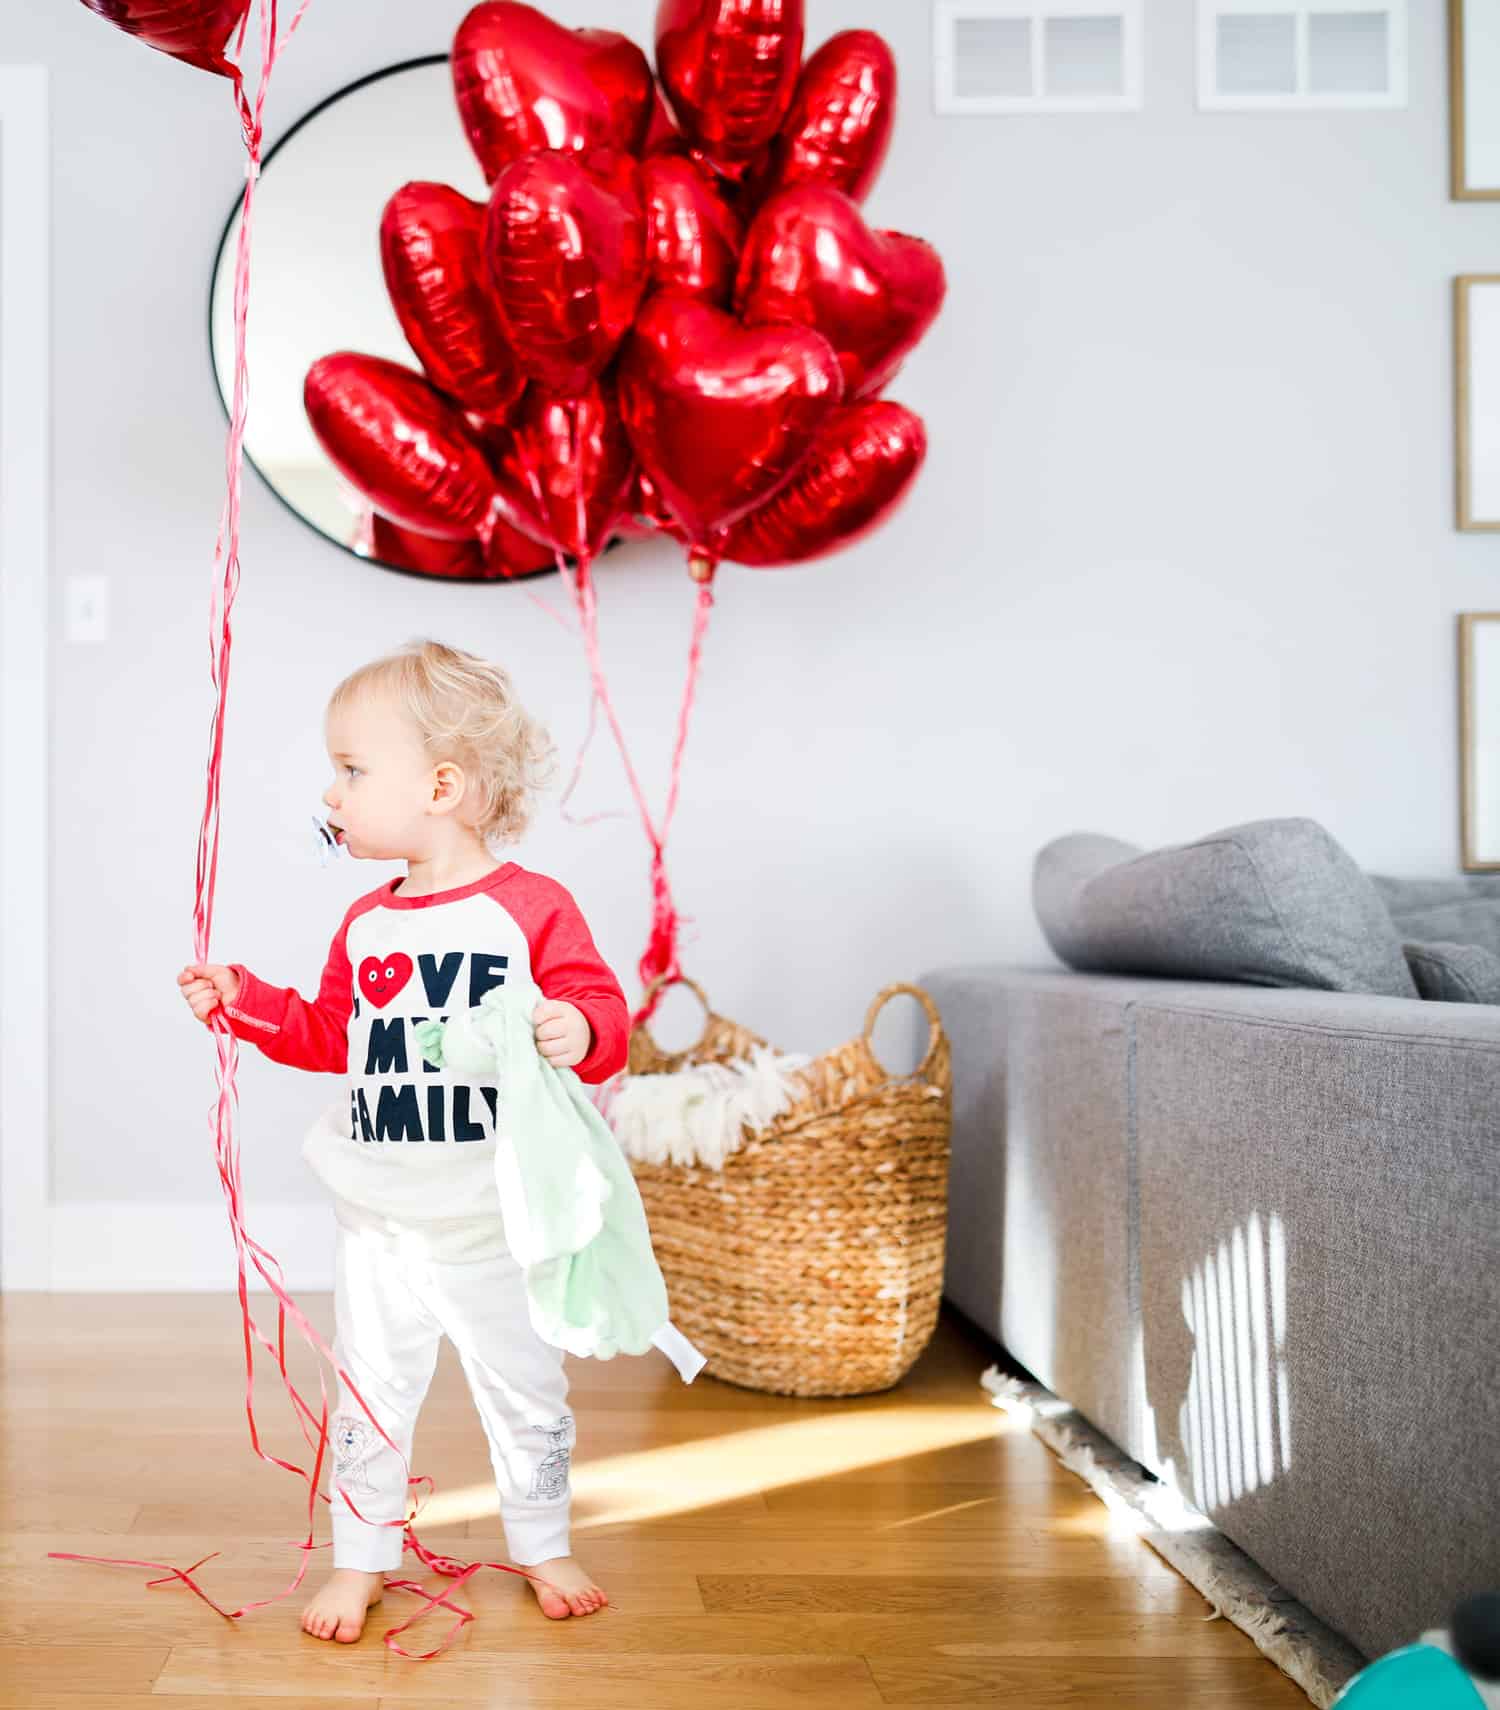 Child with heart balloons